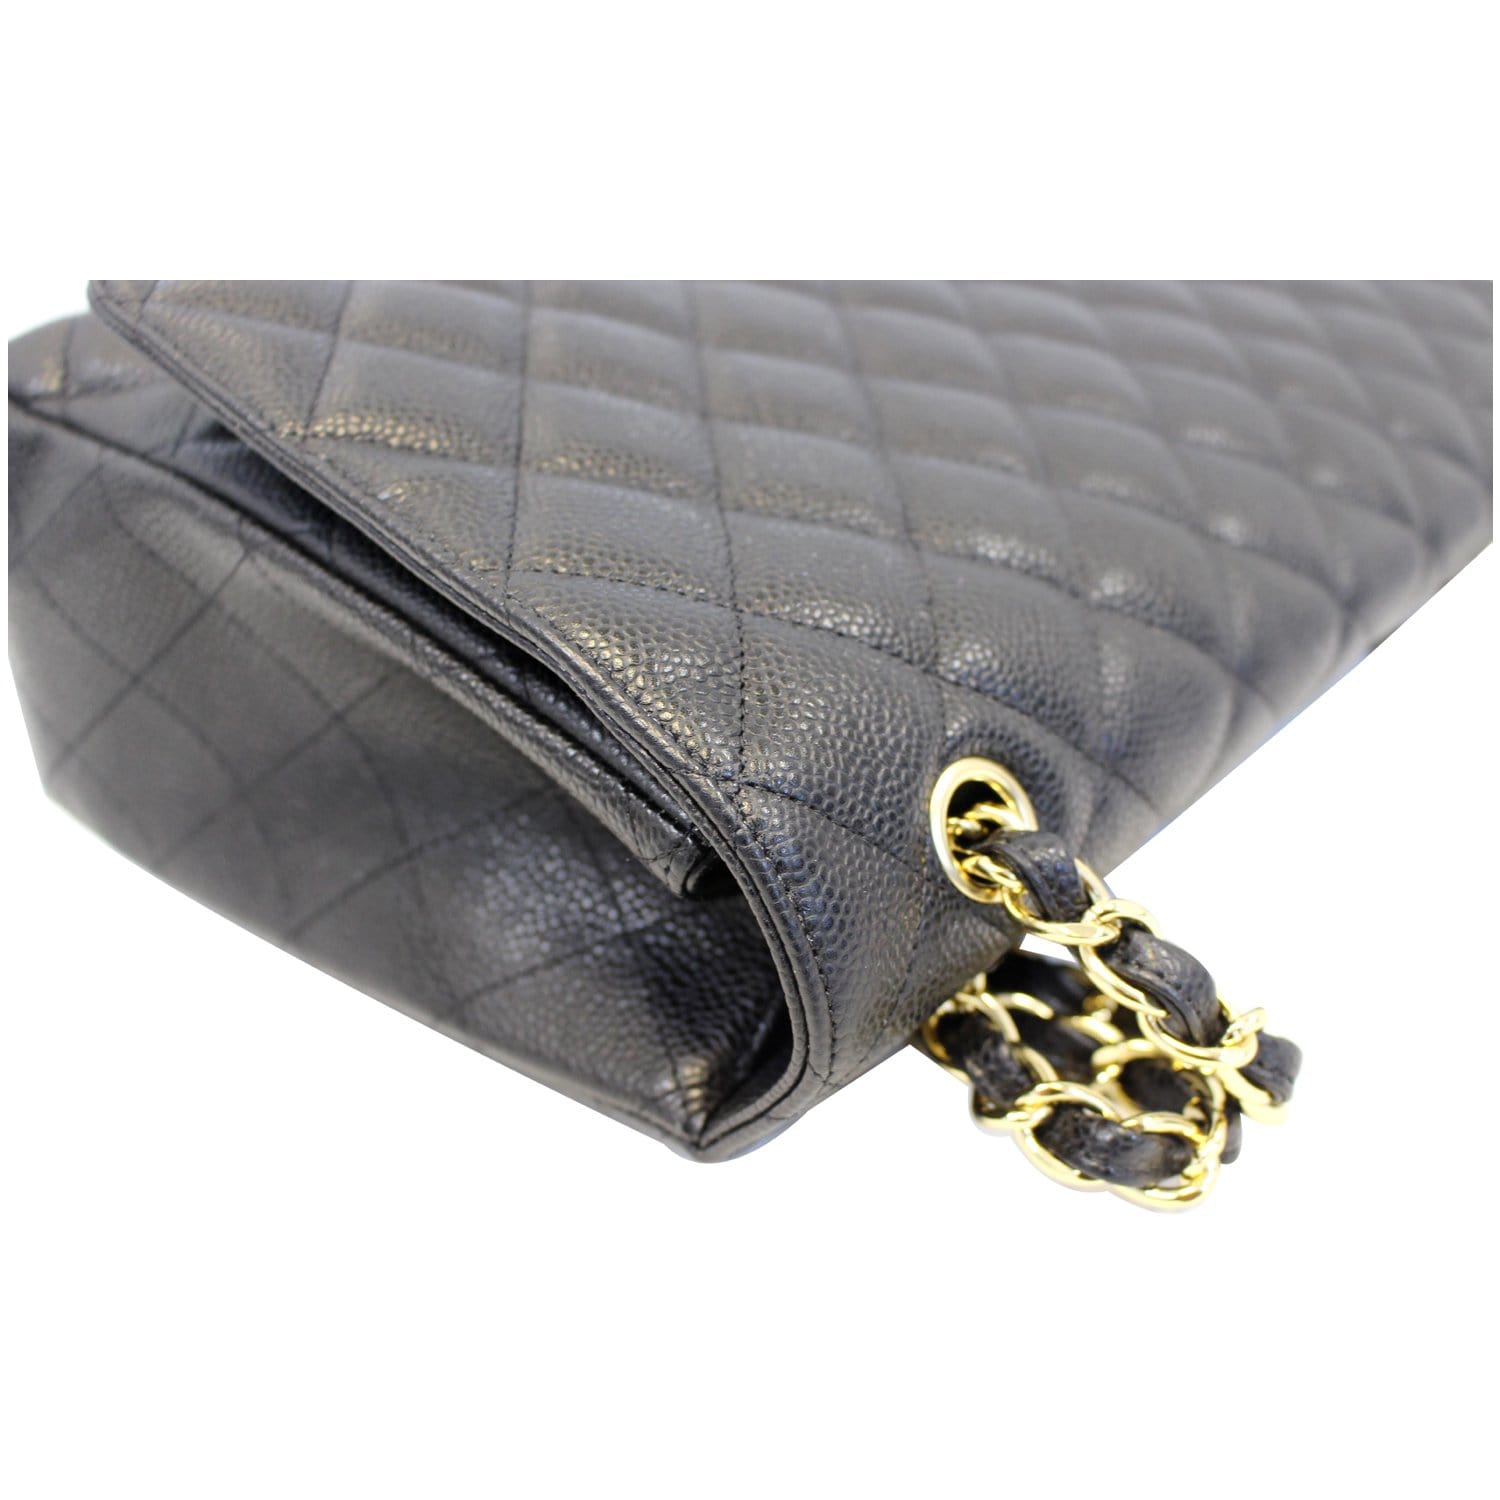 Chanel Green Quilted Lambskin Soft Maxi Single Flap Bag Leather ref.614379  - Joli Closet